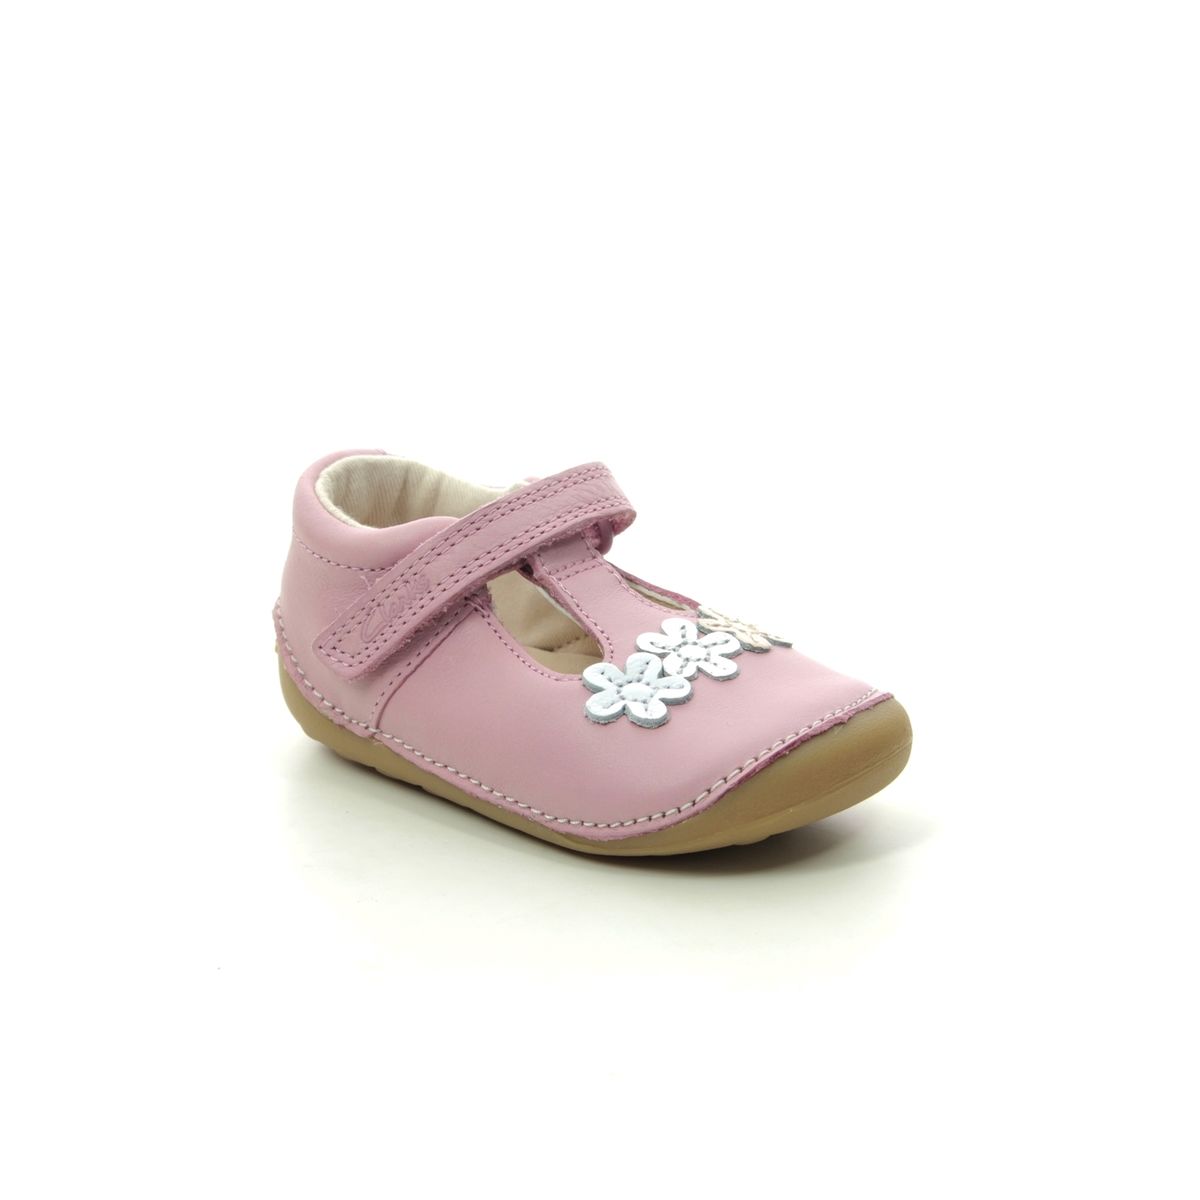 Clarks Tiny T G Pink Leather first and baby shoes